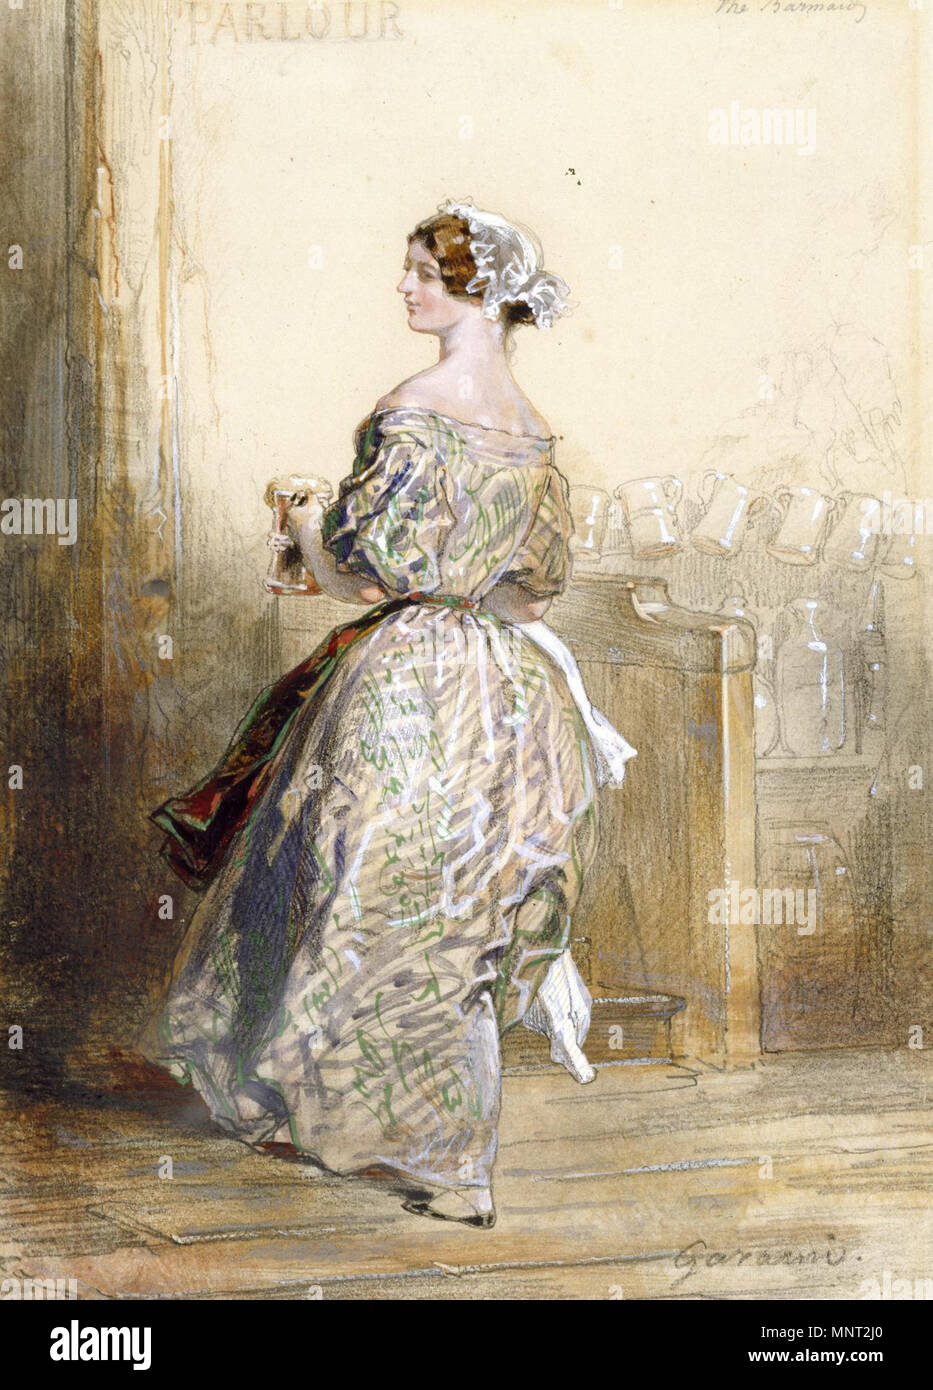 Paul Gavarni (French, 1804-1866). 'The Barmaid,' 1847-1851. watercolor, crayon, and graphite with white heightening and gum heightening on cream, moderately thick, slightly textured wove paper. Walters Art Museum (37.1442): Acquired by William T. Walters, 1865. 37.1442 966 Paul Gavarni - The Barmaid - Walters 371442 Stock Photo